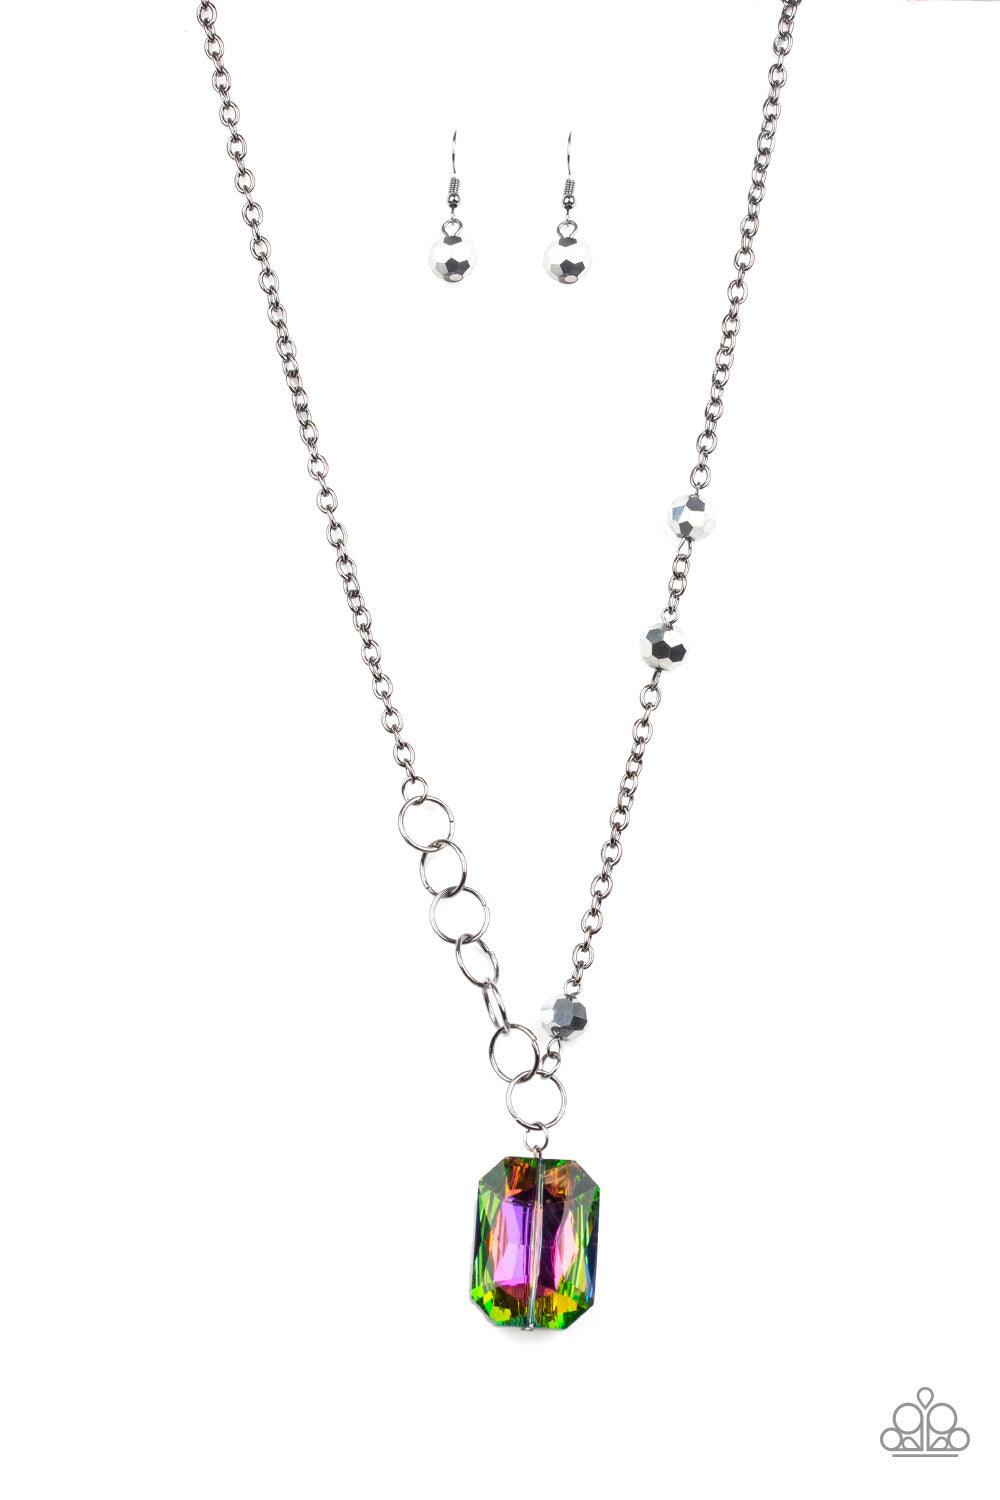 Paparazzi Accessories Never A Dull Moment - Multi A trio of faceted hematite crystal-like beads asymmetrically trickle along a mismatched gunmetal chain. Featuring a regal emerald-cut, an oversized rainbow gem swings from the bottom of the gunmetal chain